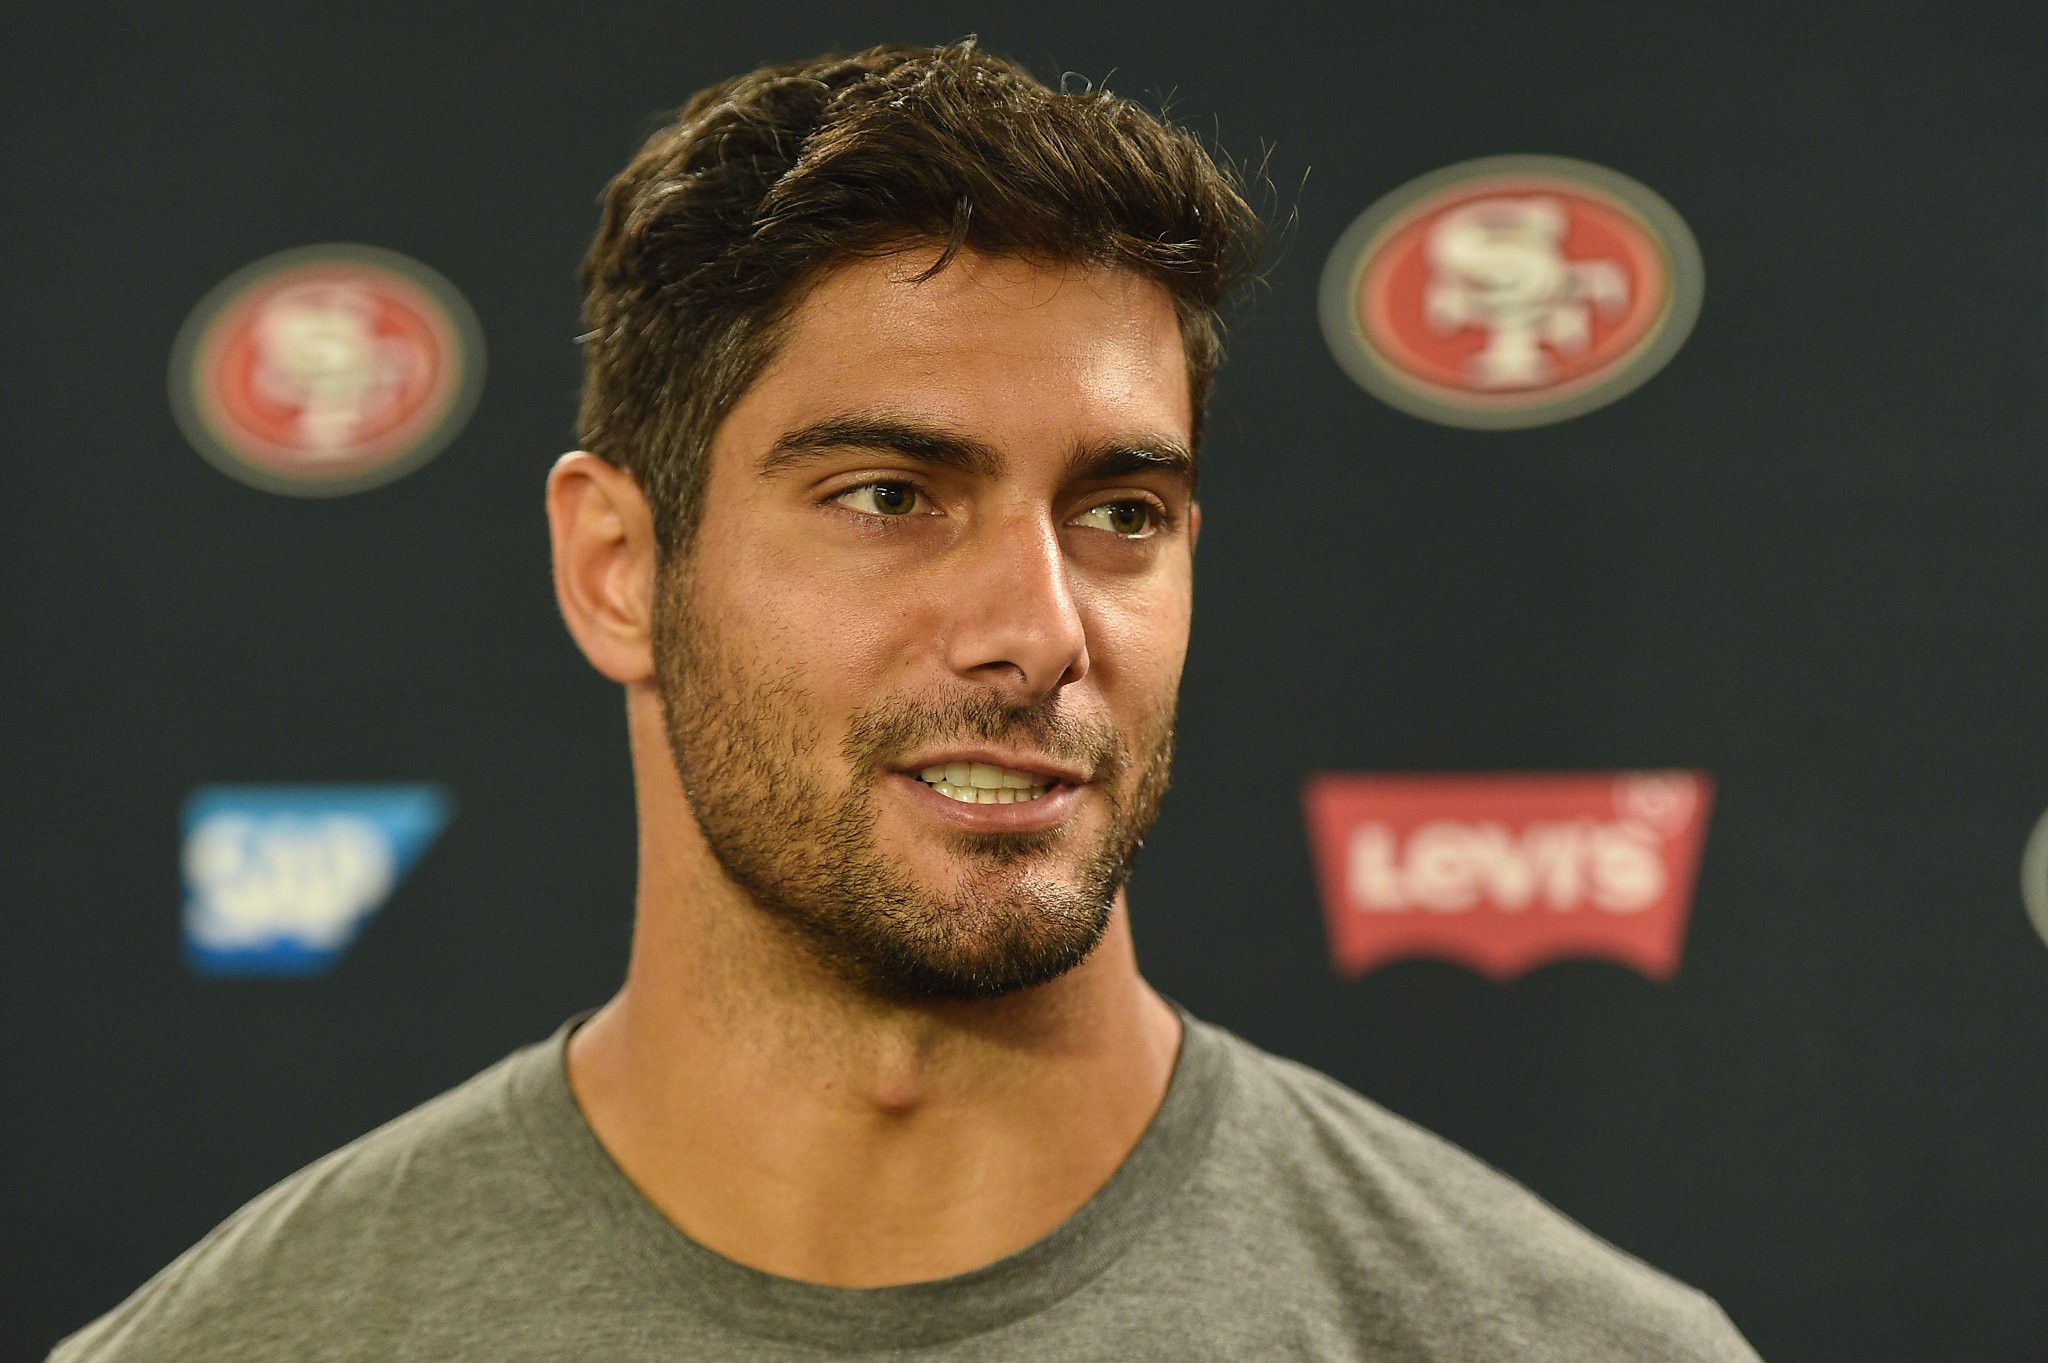 Jimmy garoppolo reportedly likely to stay with 49ers if they don't tak...